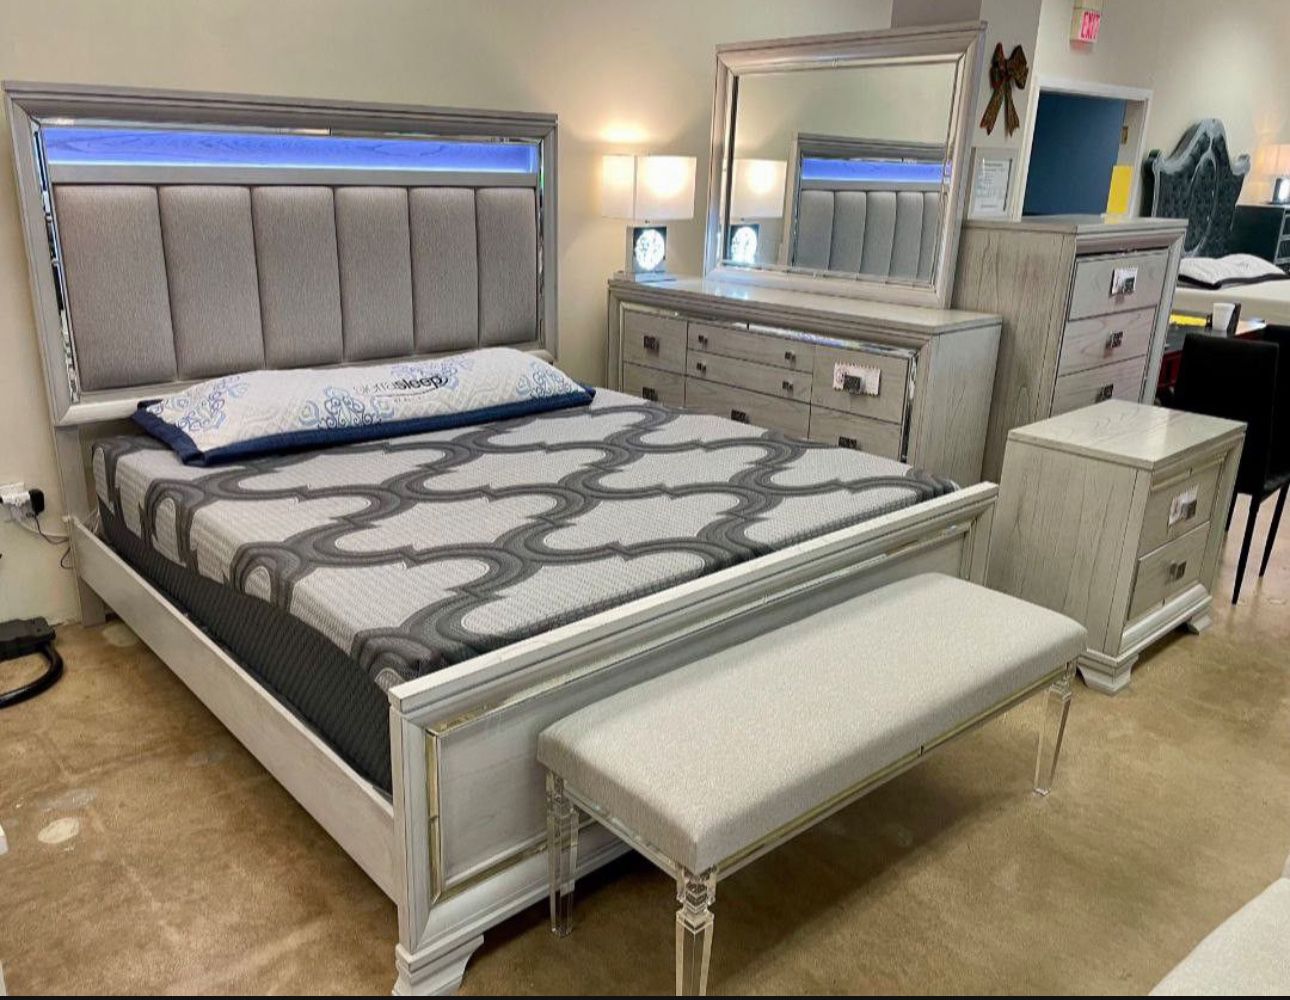 NEW VAIL KING AND QUEEN SIZE BEDROOM SET WITH DRESSER MIRROR NIGHTSTAND CHEST WITHOUT MATTRESS AND FREE DELIVERY 